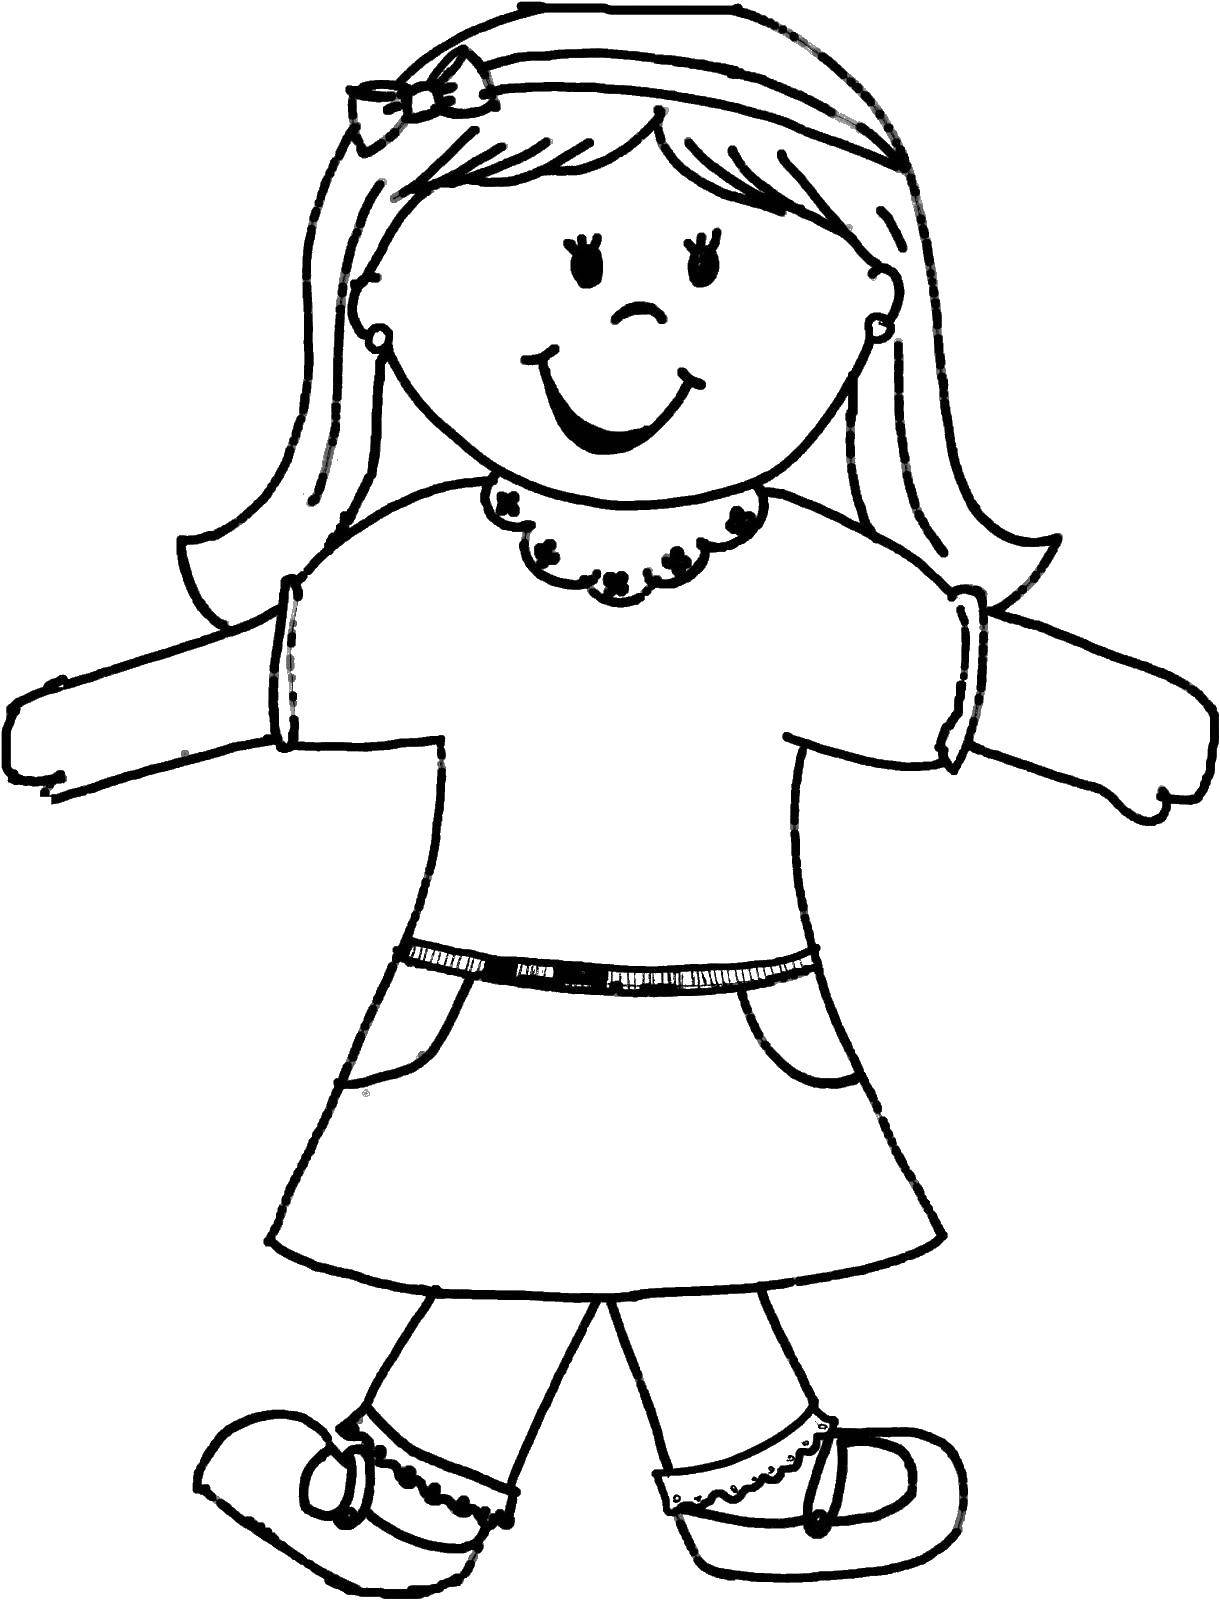 Coloring The girl with the headband. Category children. Tags:  girl, child, headband.